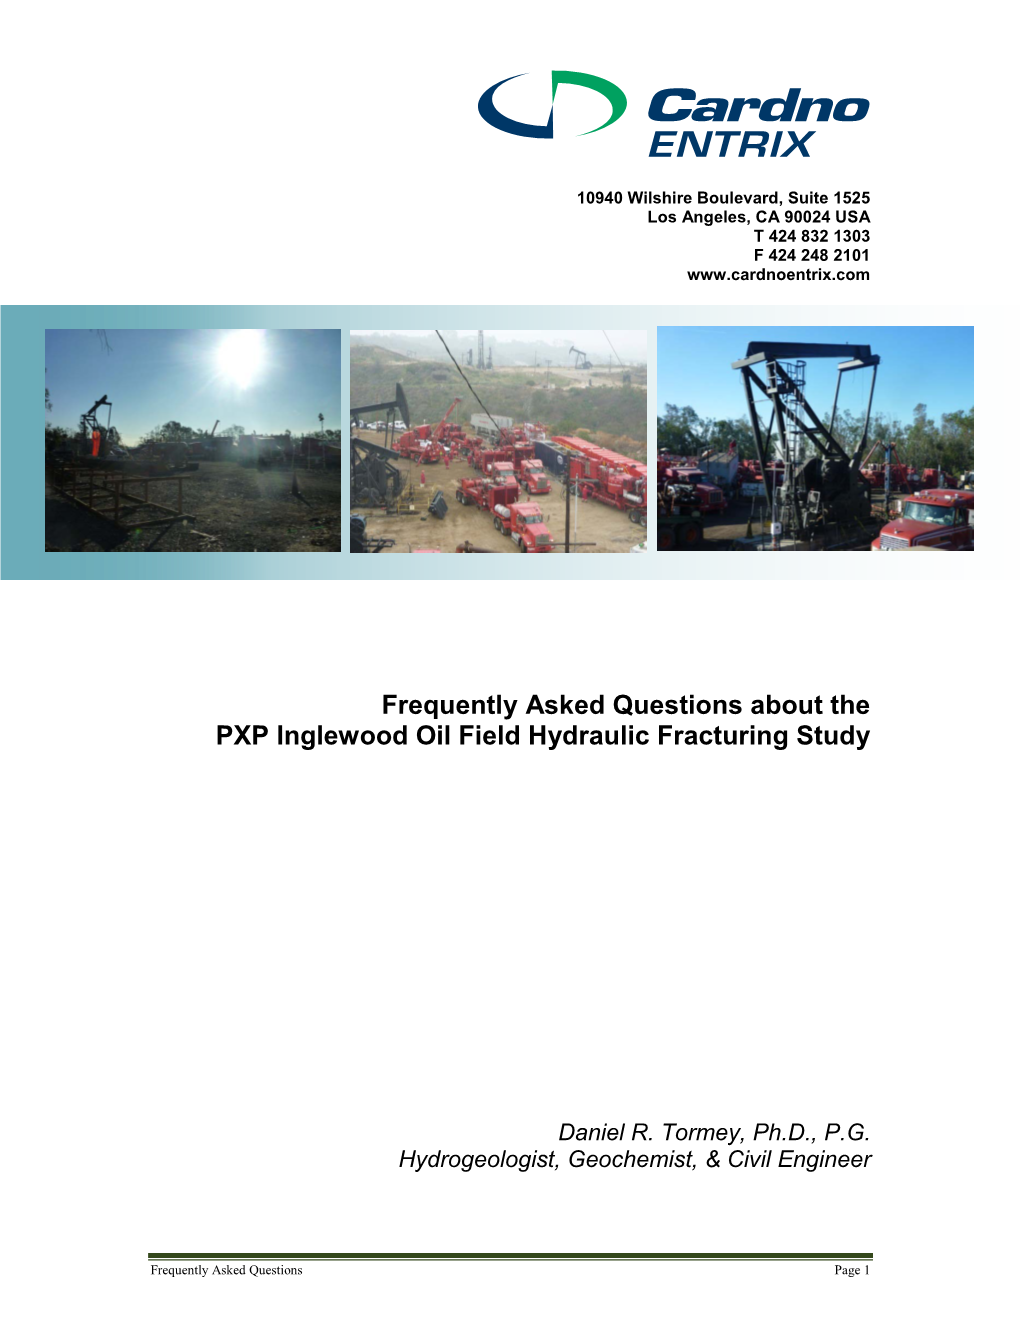 Frequently Asked Questions About the PXP Inglewood Oil Field Hydraulic Fracturing Study